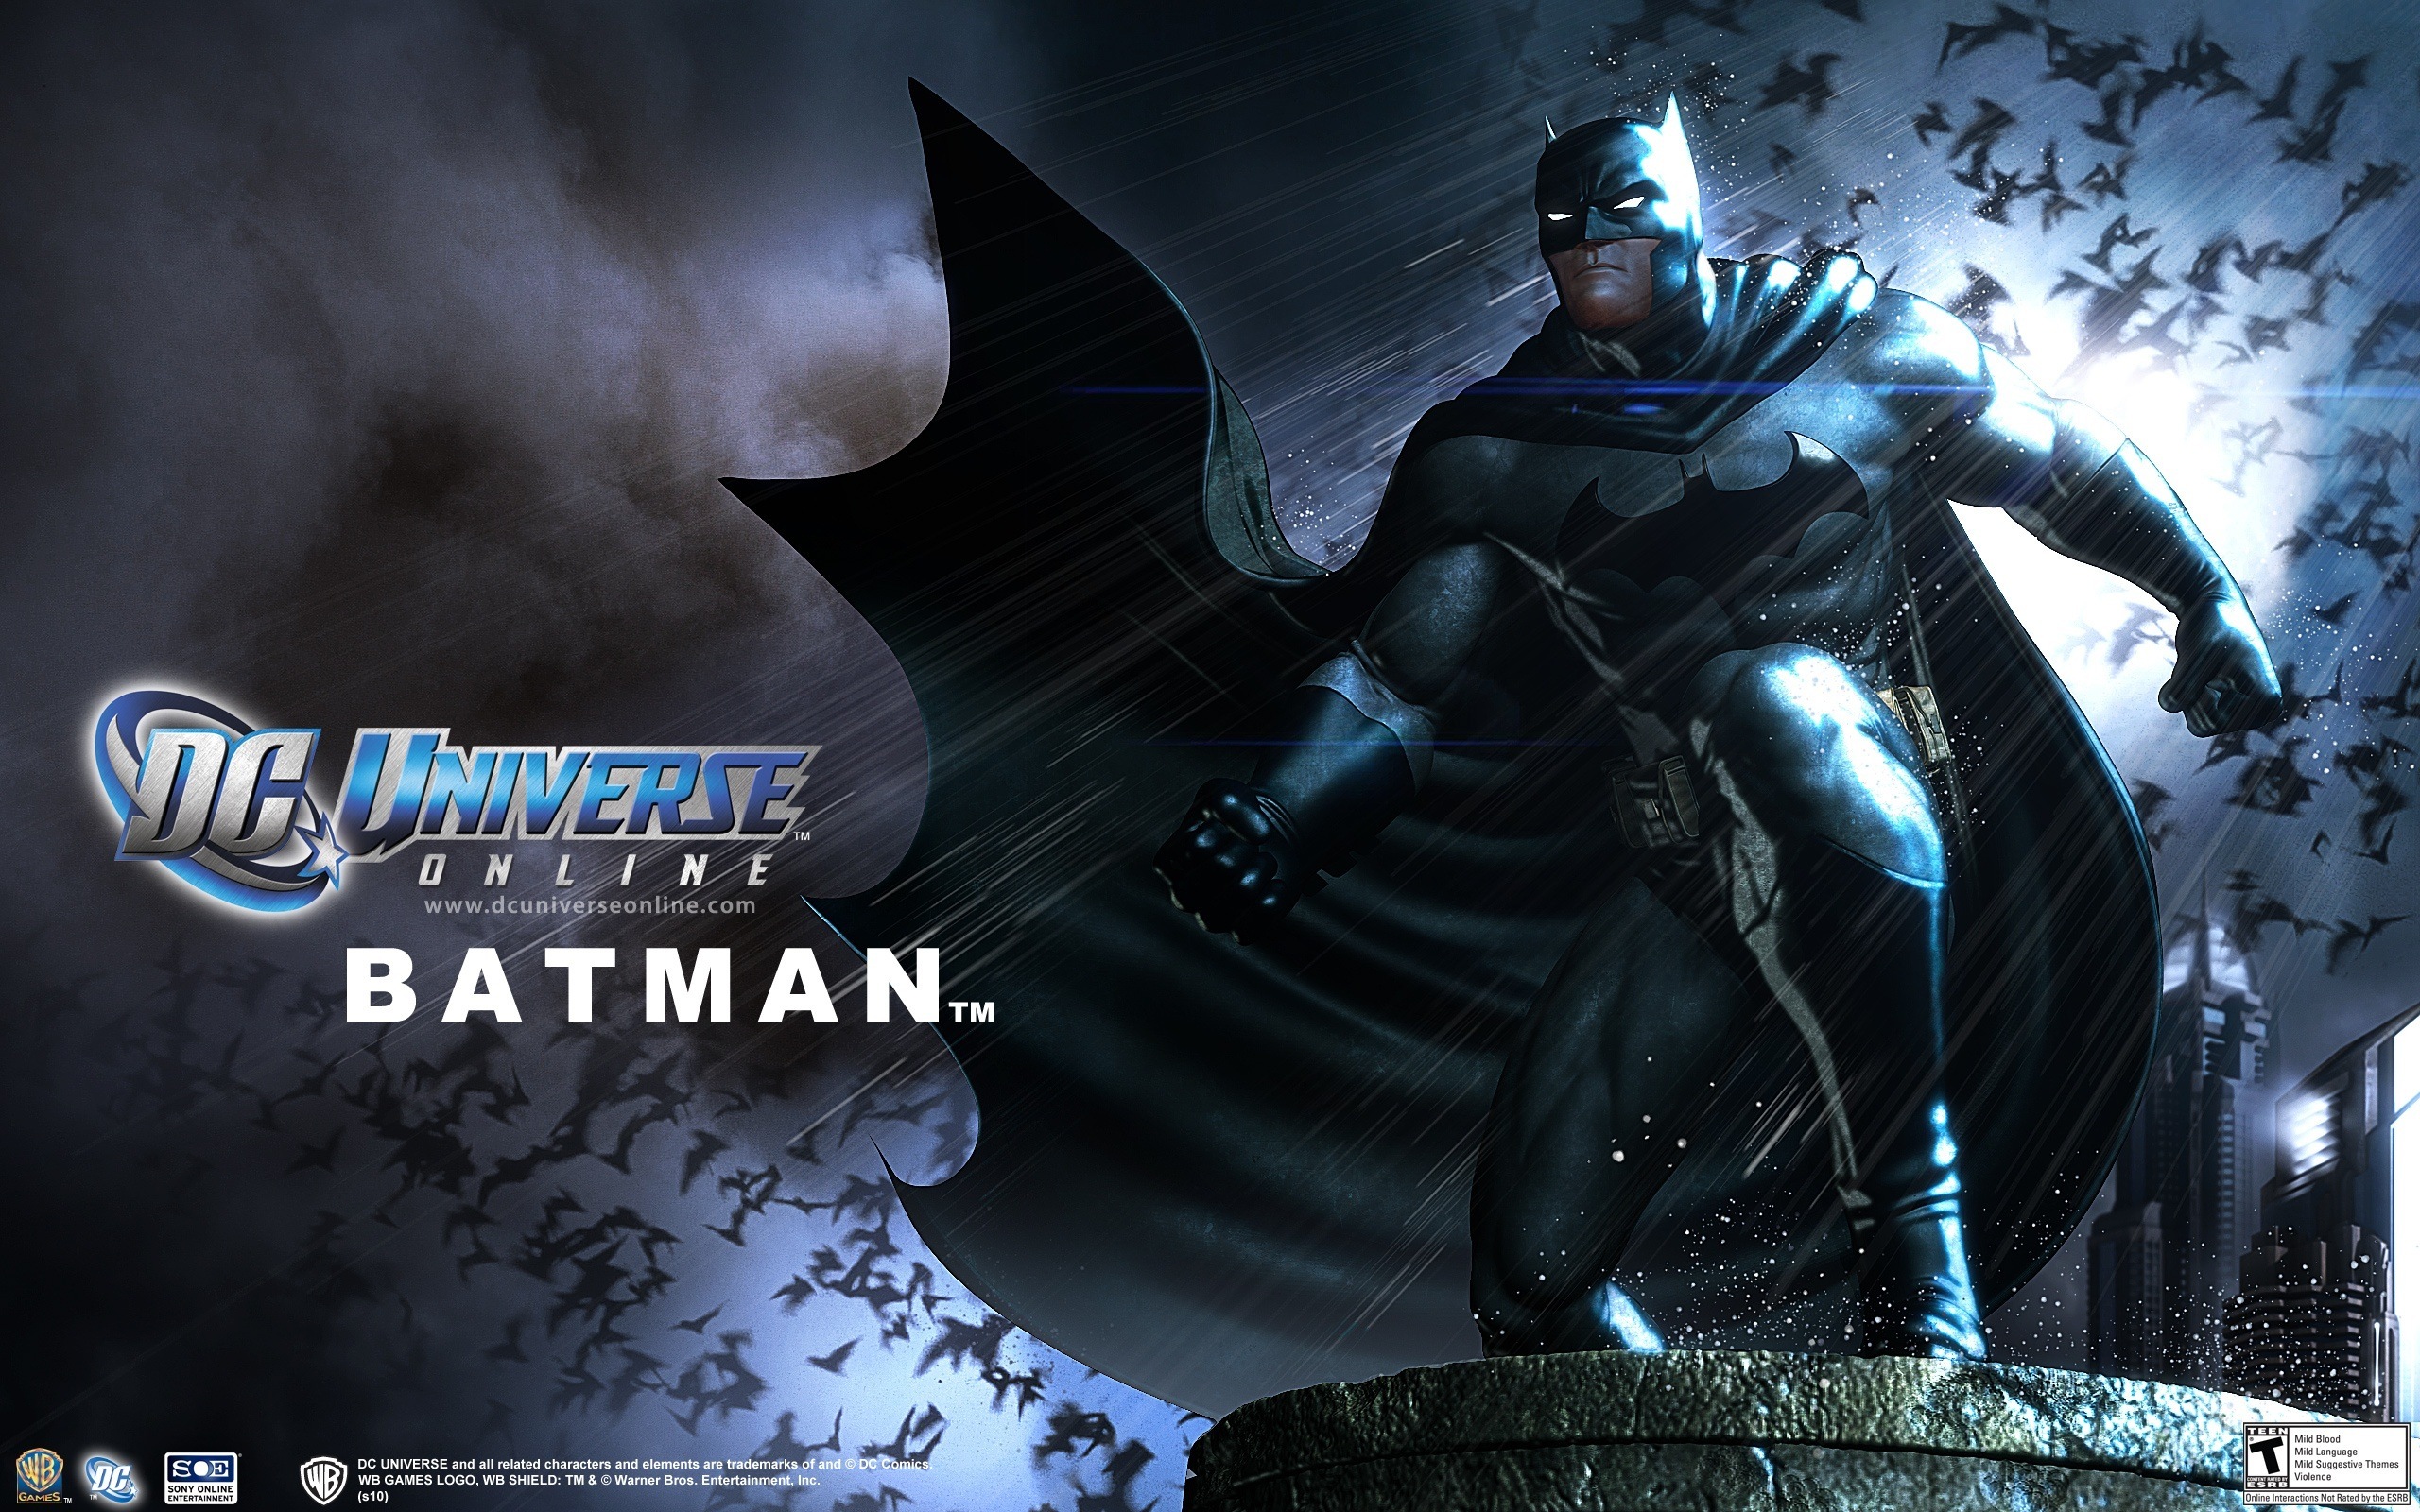 DC Universe Online HD game wallpapers #18 - 2560x1600